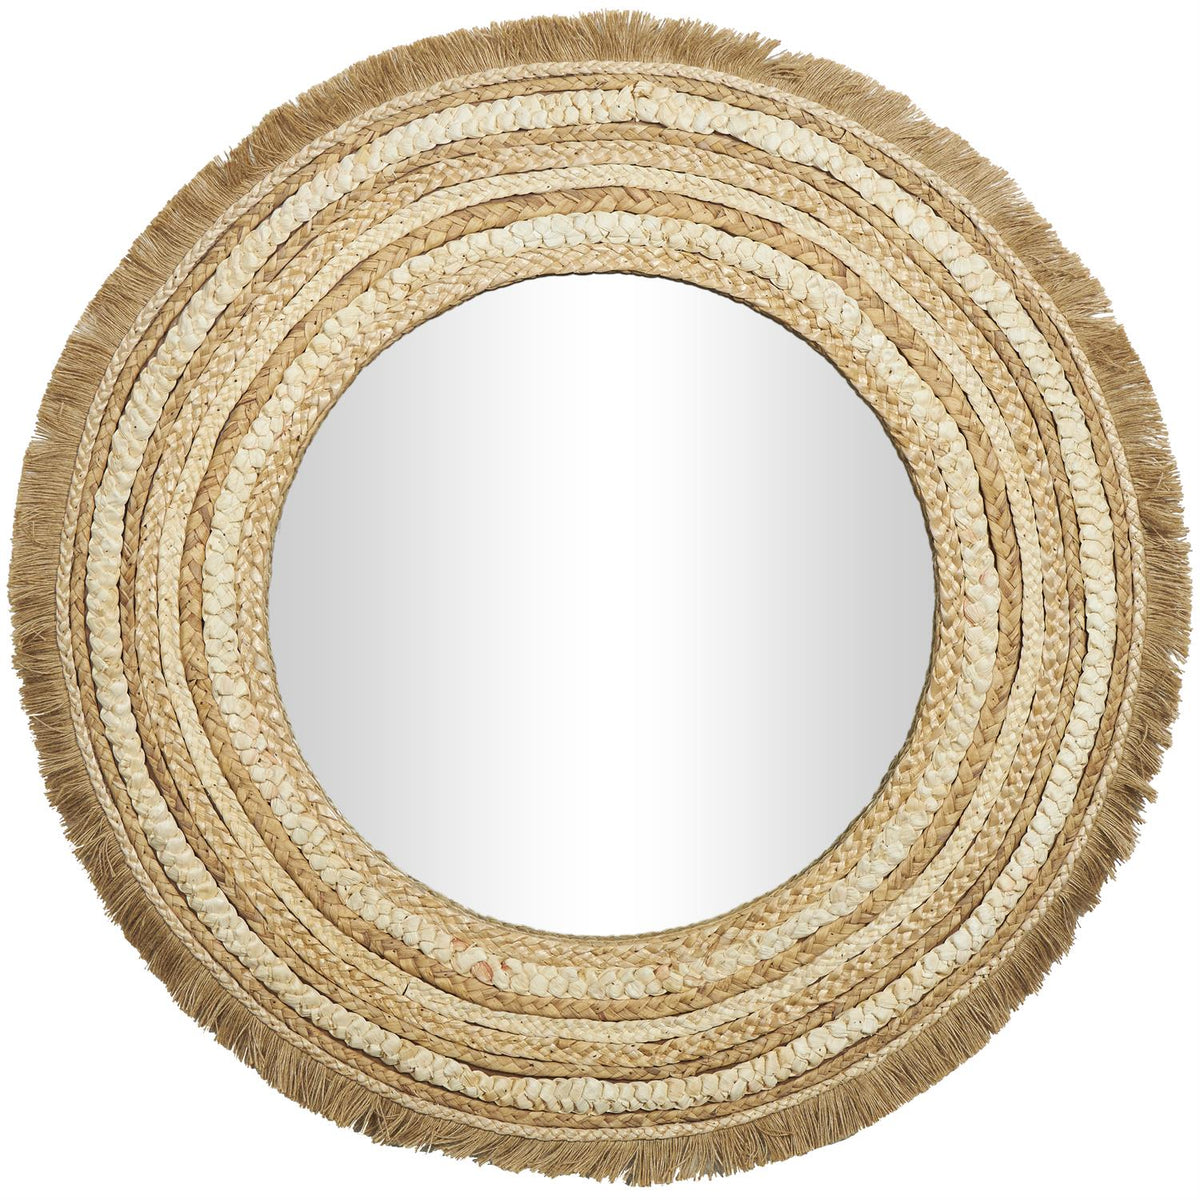 Beige Wood Woven Wall Mirror With Fringe Ends, 38" X 1" X 38"